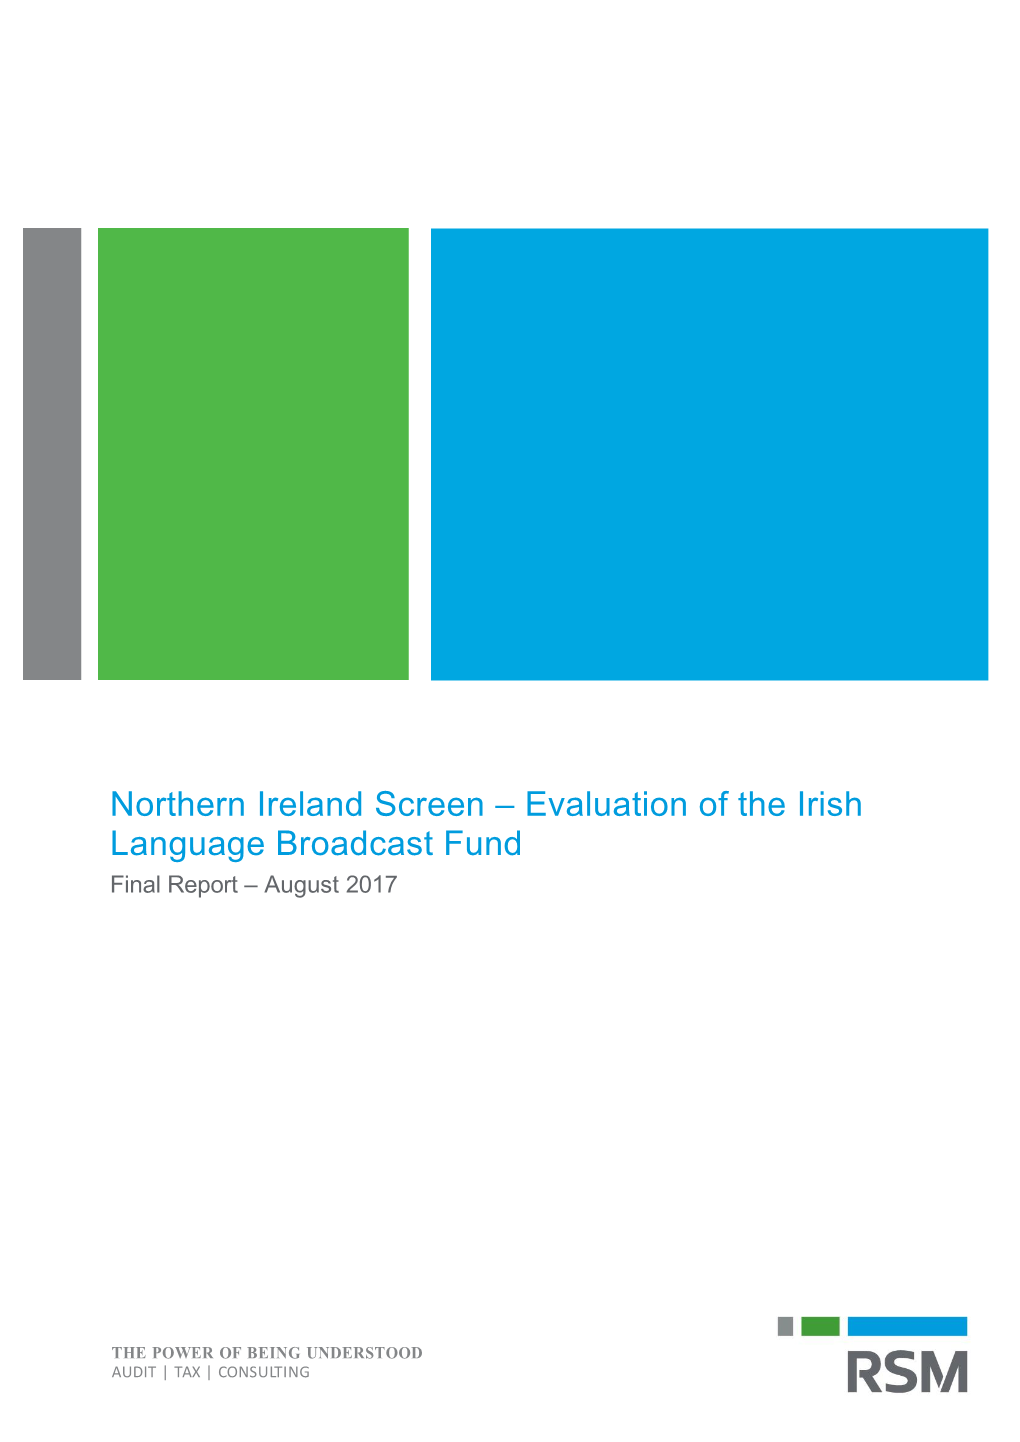 Evaluation of the Irish Language Broadcast Fund Final Report – August 2017